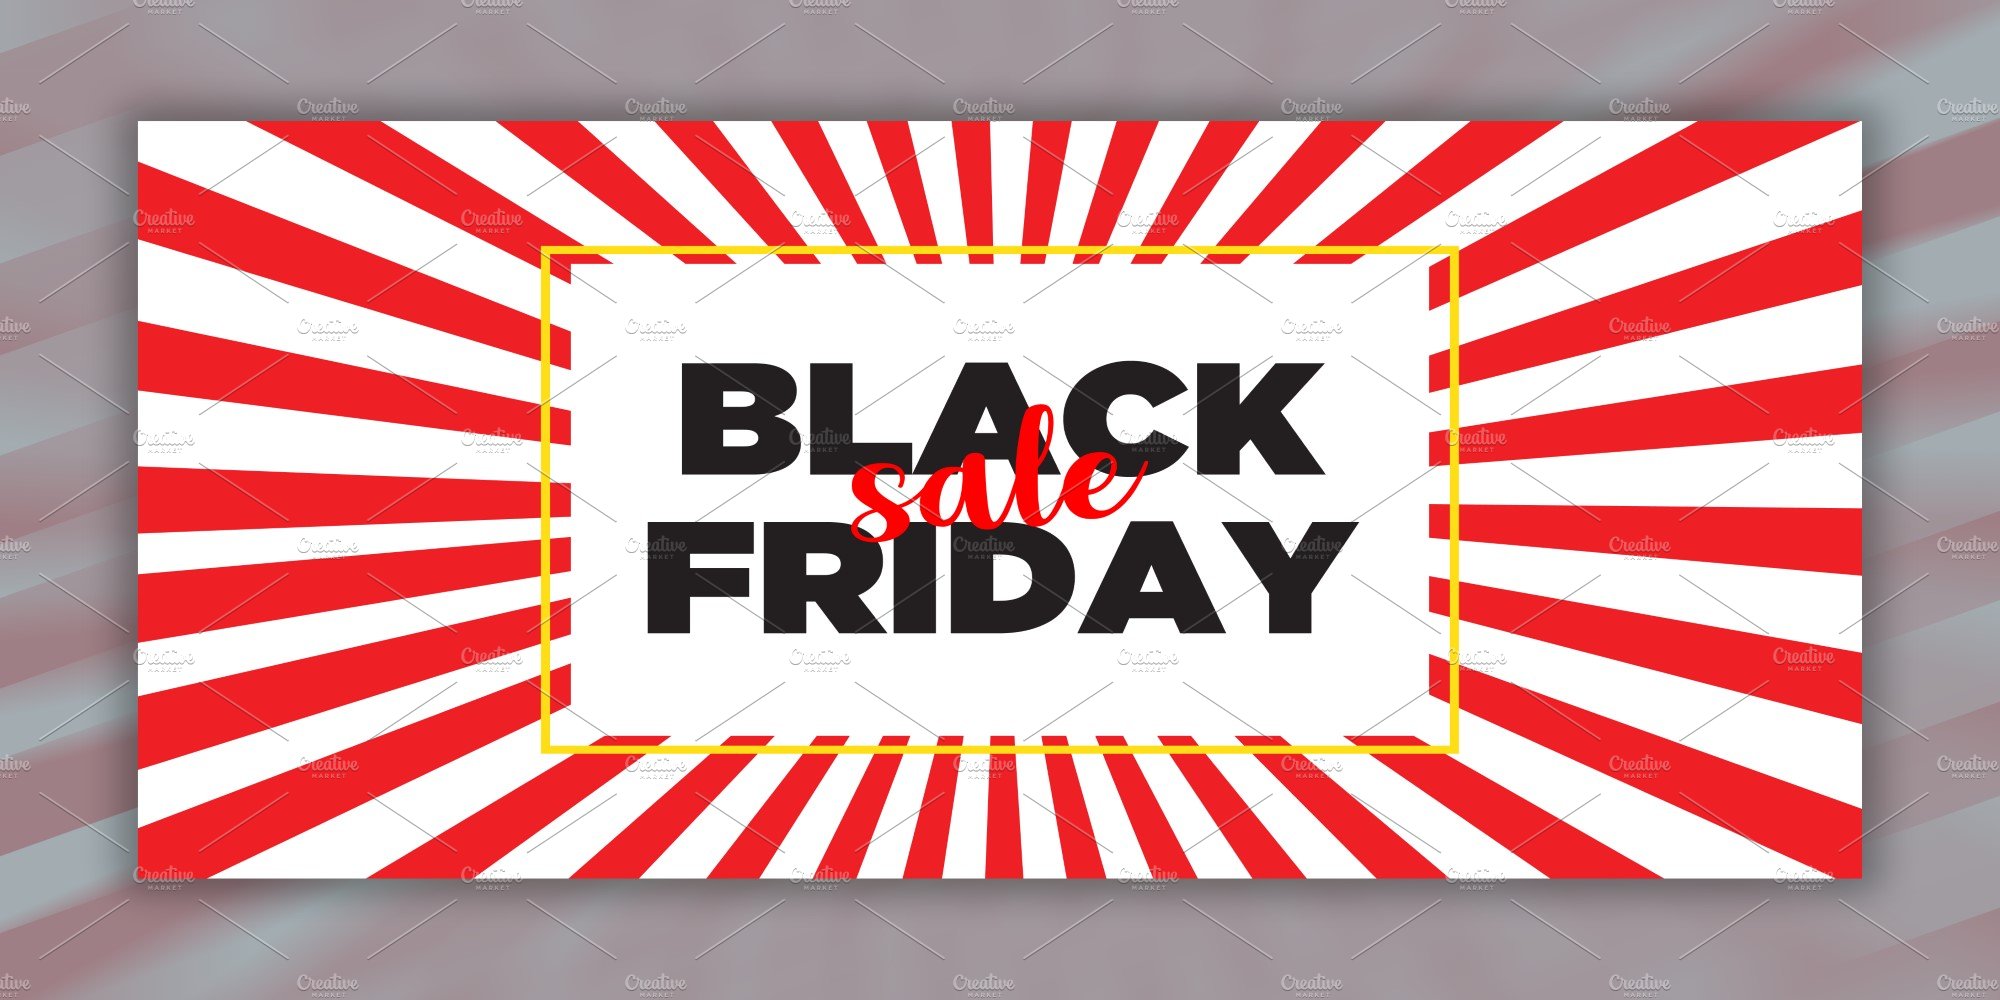 Light Black Friday banner with red lines and black font.